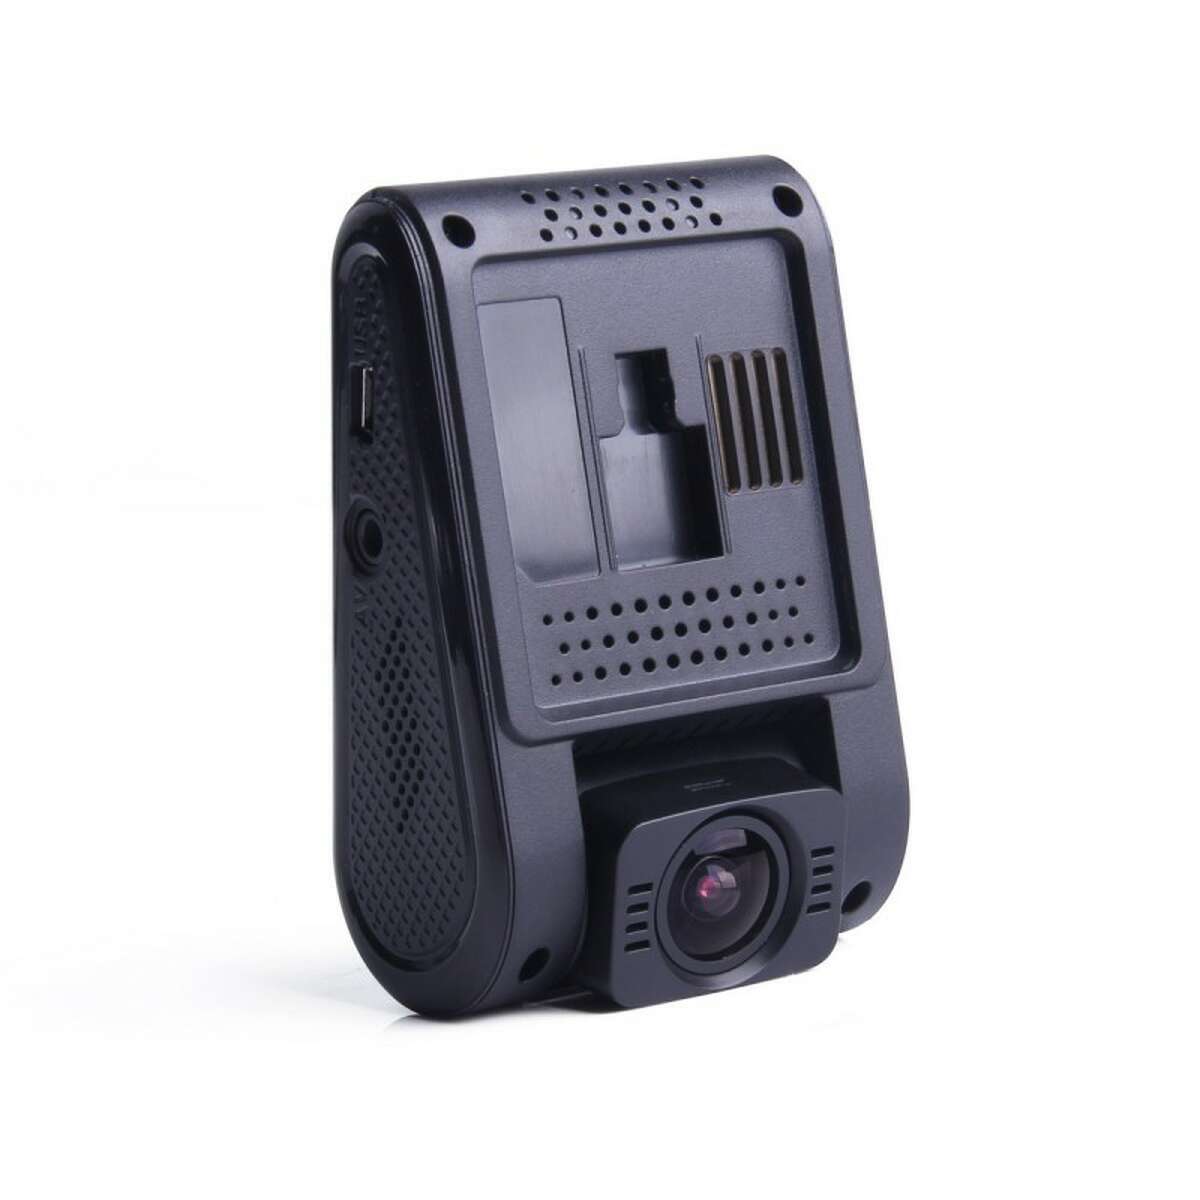 Viofo A119S Dash Cam  At around $120, the Viofo A119S can get 1080p recording at 60 frames per second (fps) or 1440p recording at 30fps. It also has a wide focal length and is small enough to where it doesn't distract. But  If you want to save some cash, the previous model, the A118, is a solid choice as well.